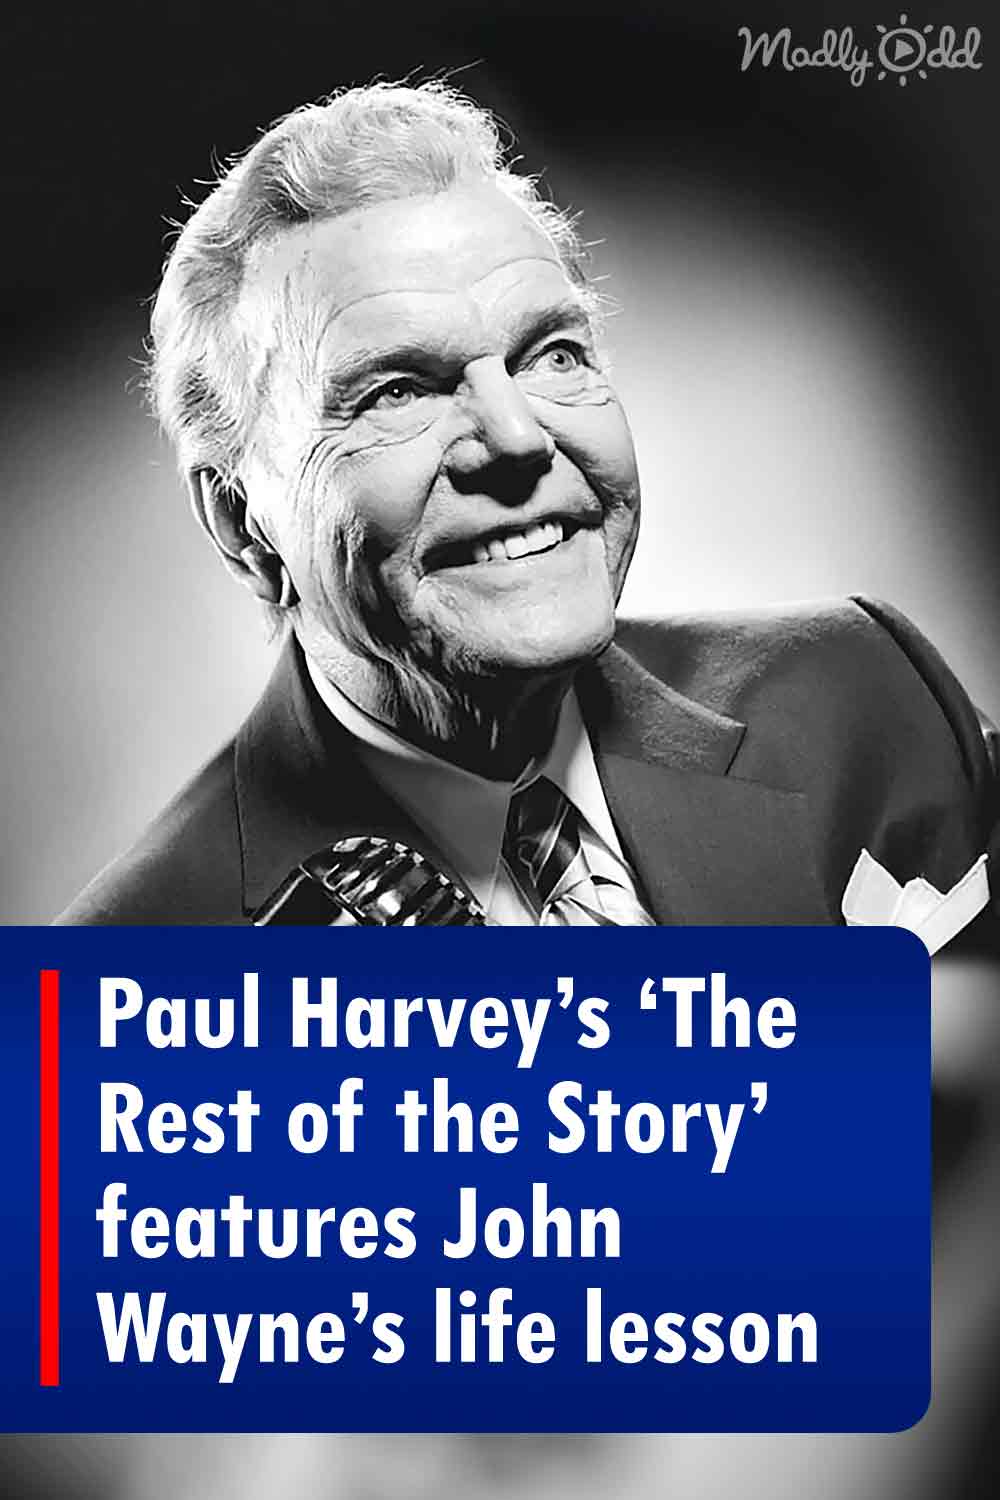 Paul Harvey’s ‘The Rest of the Story’ features John Wayne’s life lesson